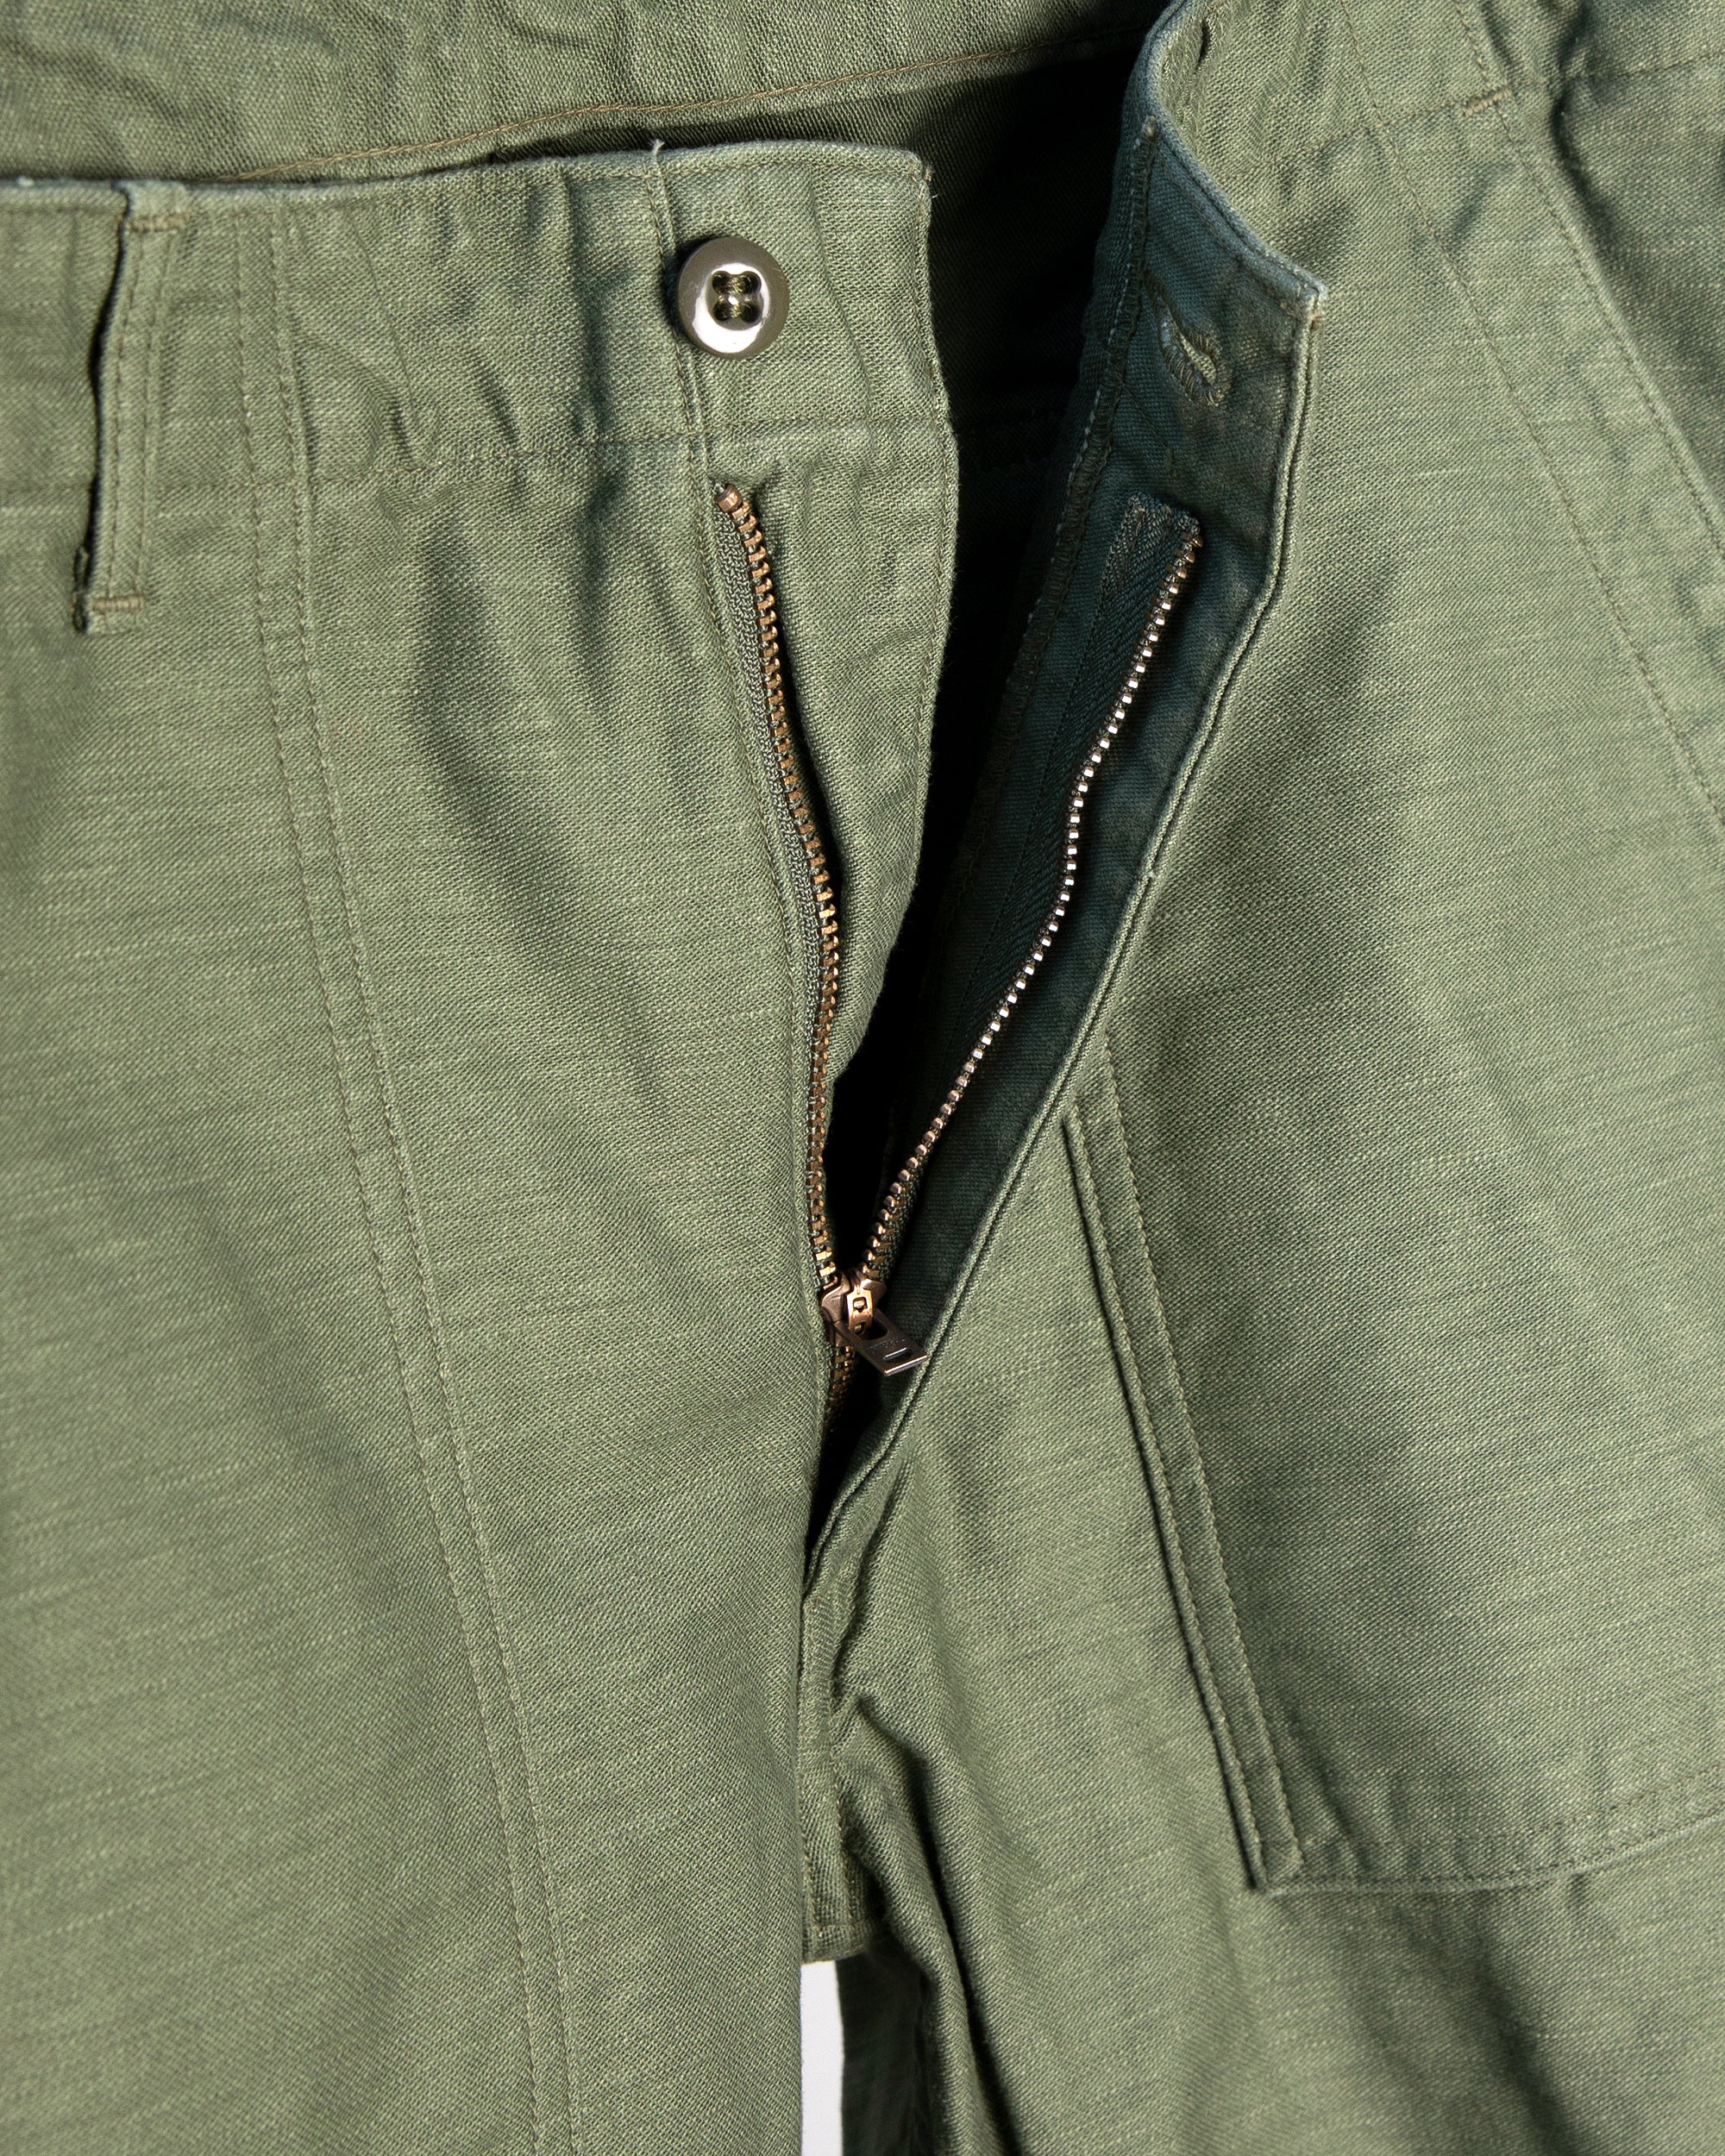 Slim Fit US Army Fatigue Pant - Green